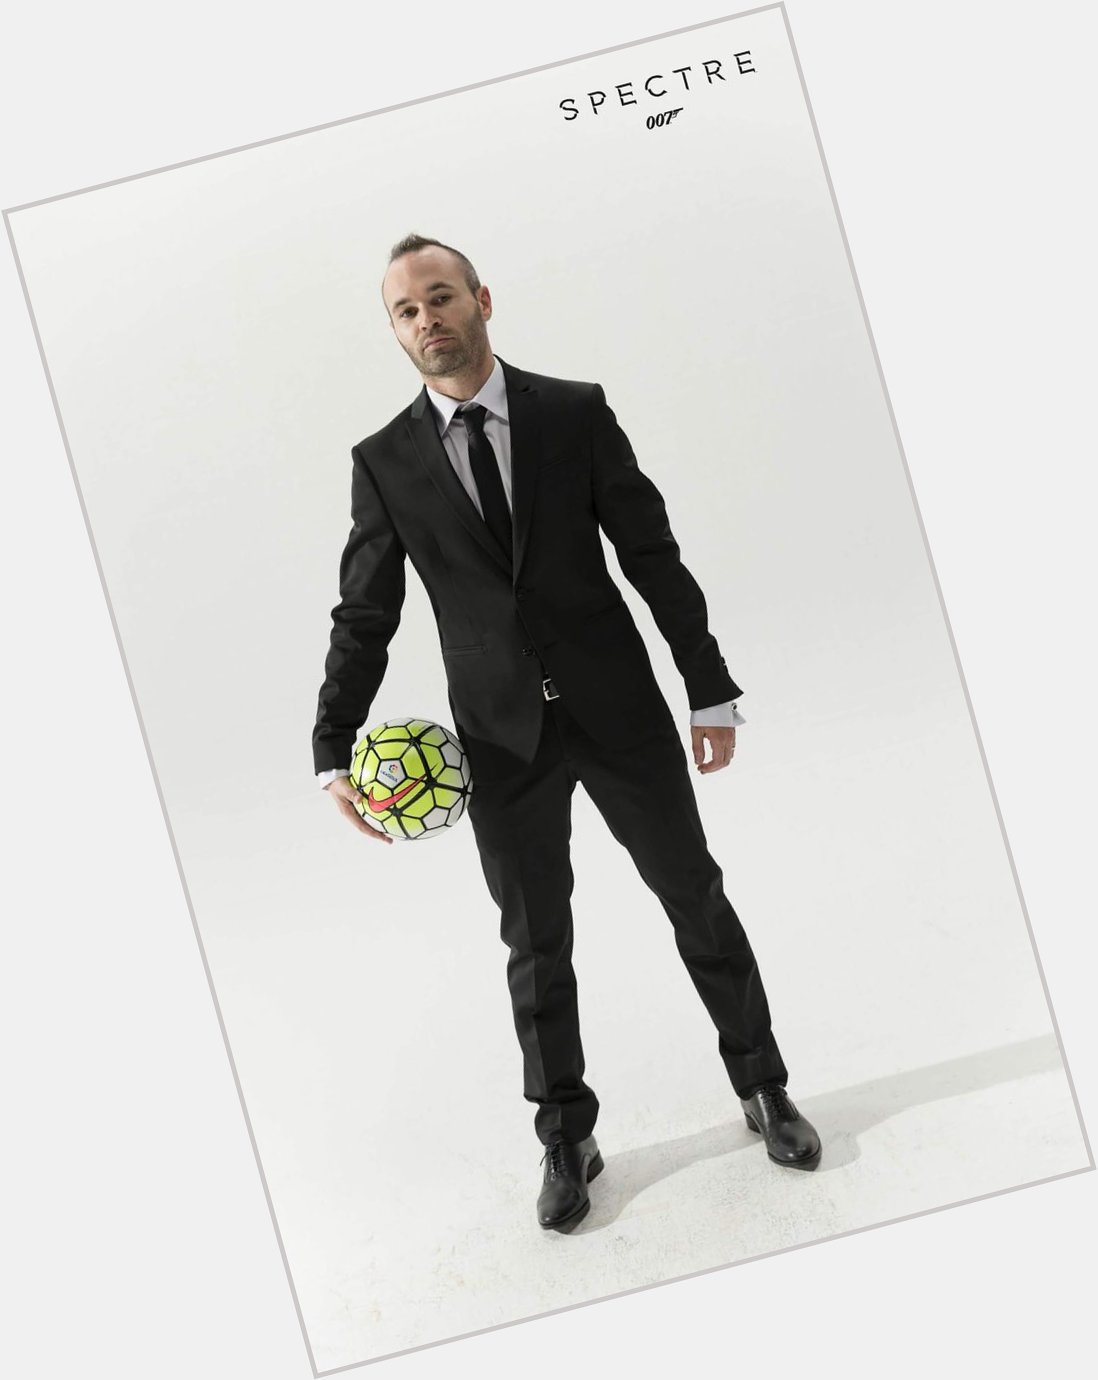 An artist in the age of athletes.

Happy 34th birthday Andrés Iniesta   